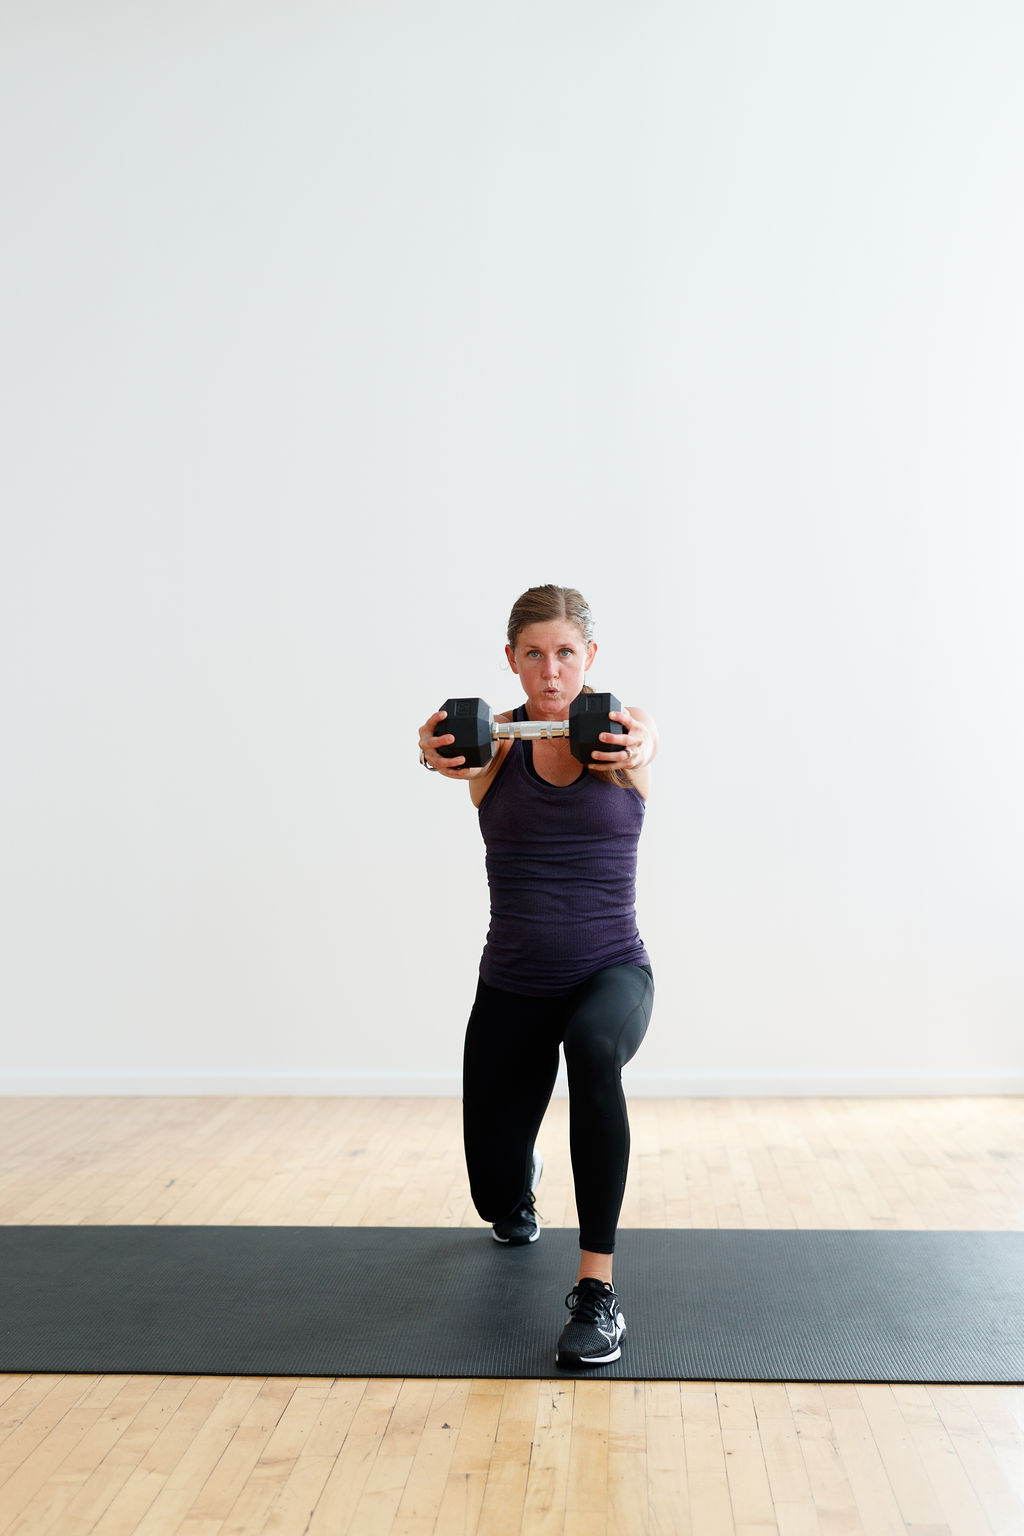 A 10-Minute Upper-Body Workout for Stronger Arms and Shoulders